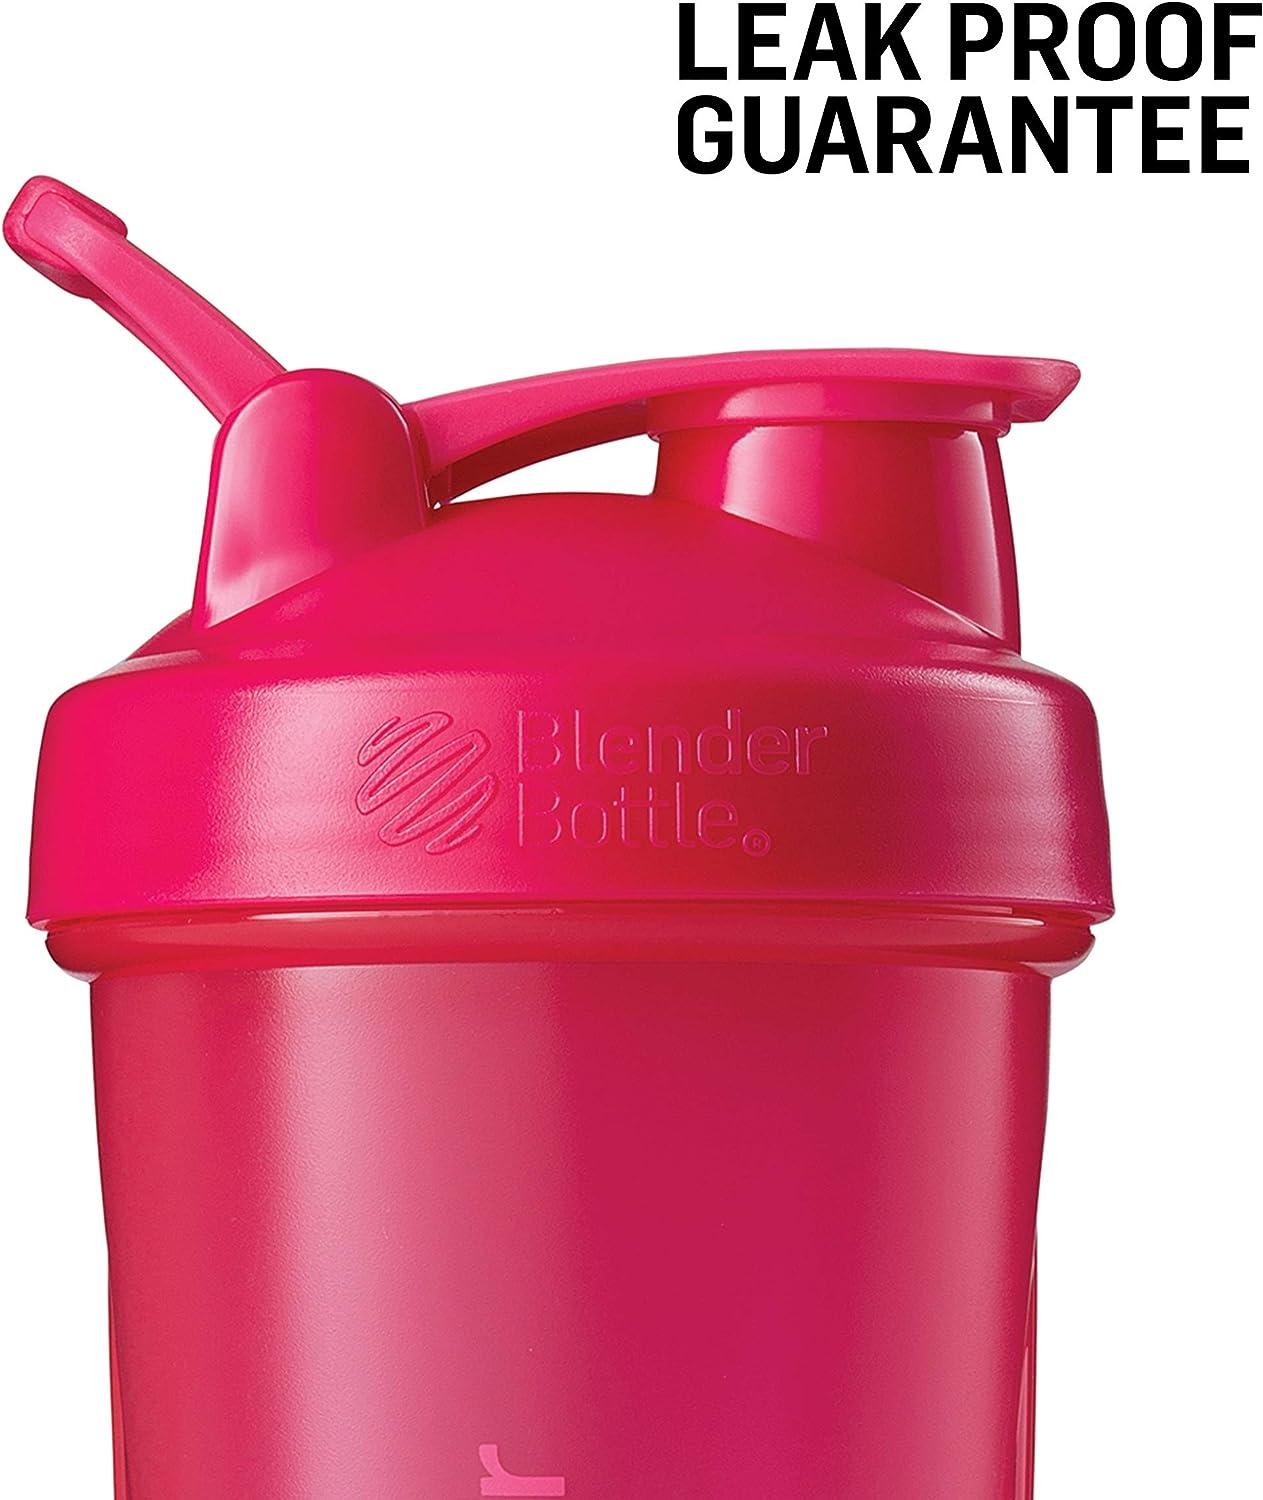 BlenderBottle Other Items in Exercise